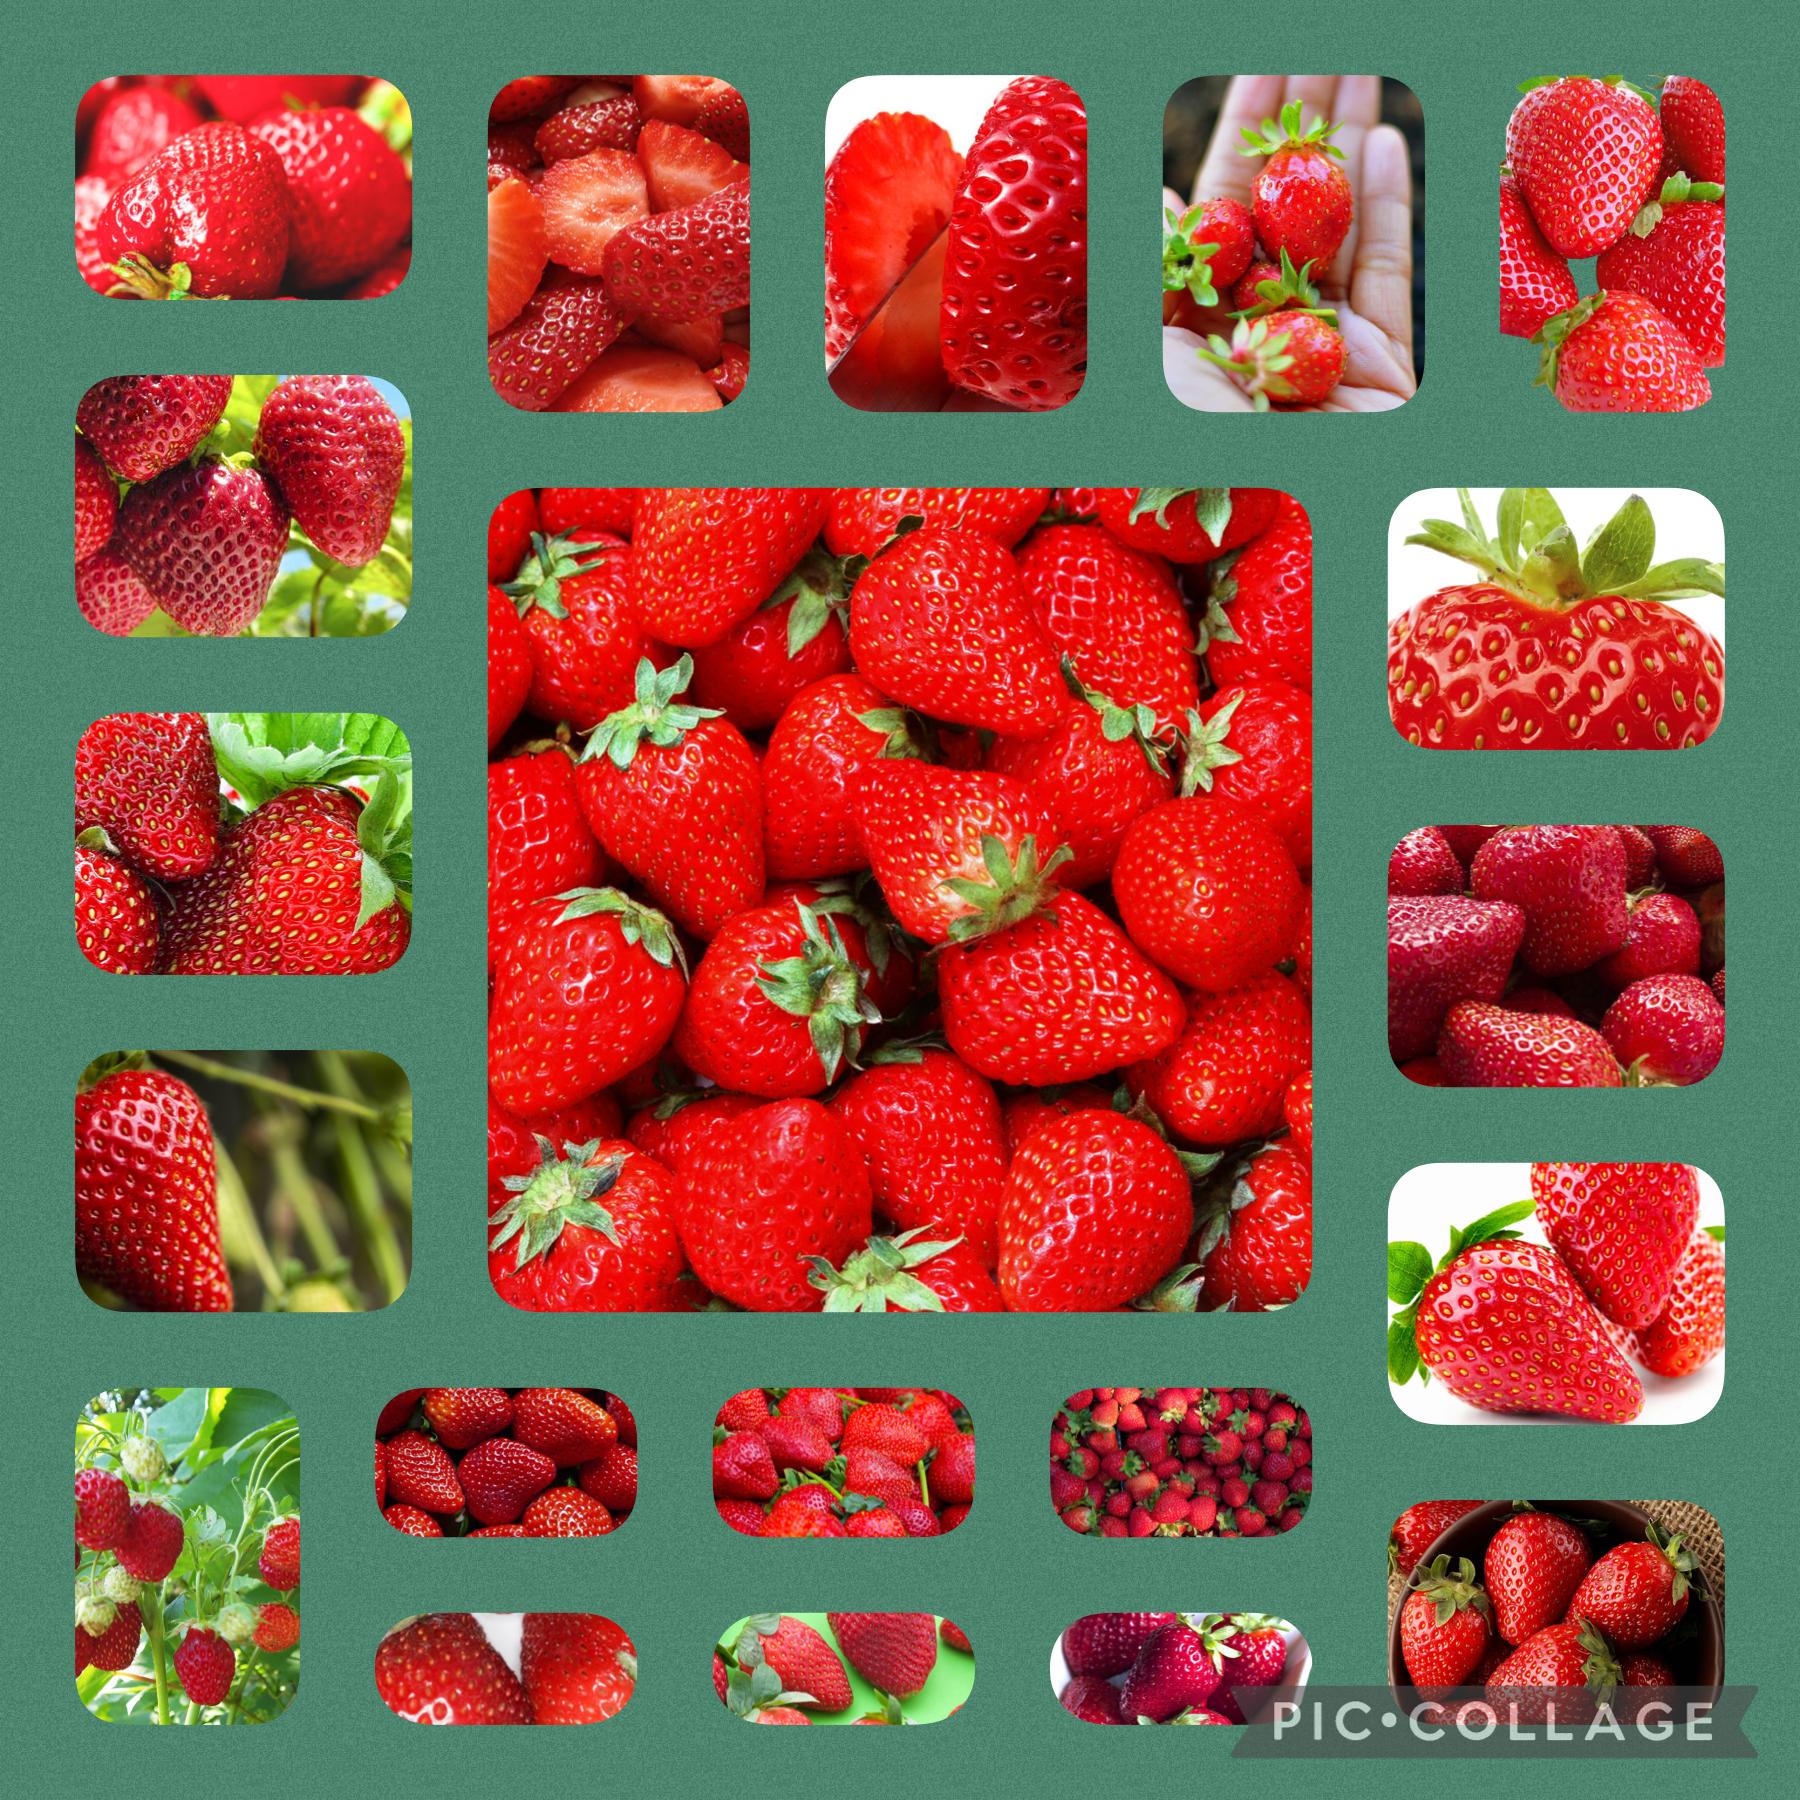 Like this post if you like to eat strawberries! 🍓🍓🍓🍓 